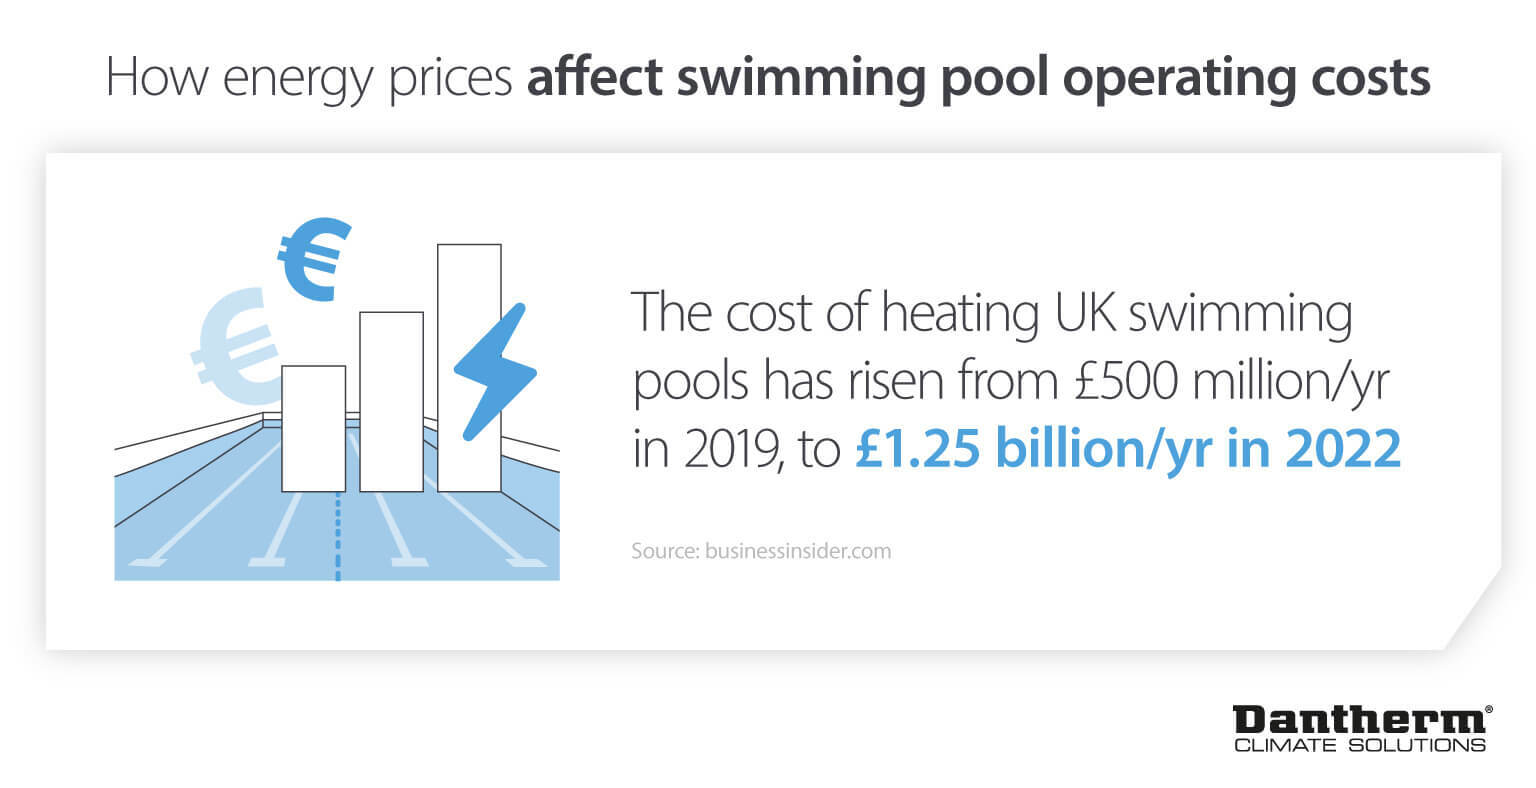 How energy prices affect swimming pool operating costs since 2019 - Dantherm infographic image